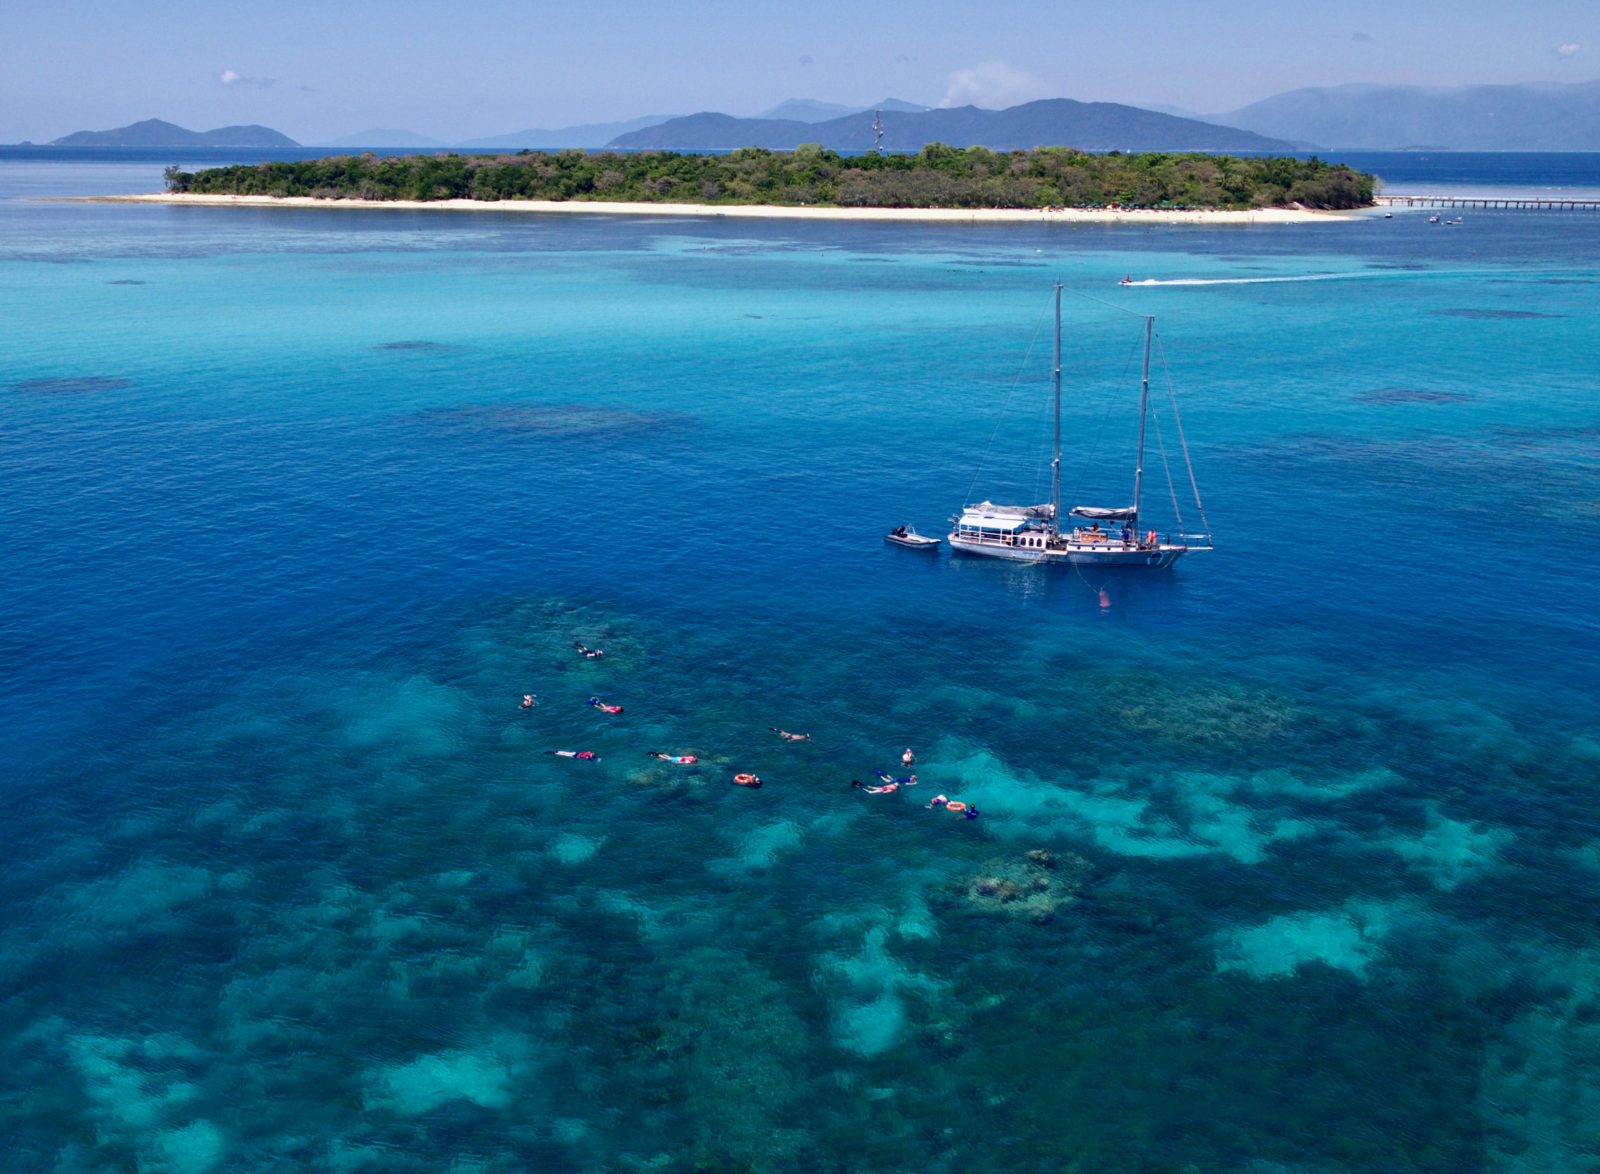 Ocean Free – Sail to Green Island & the Great Barrier Reef